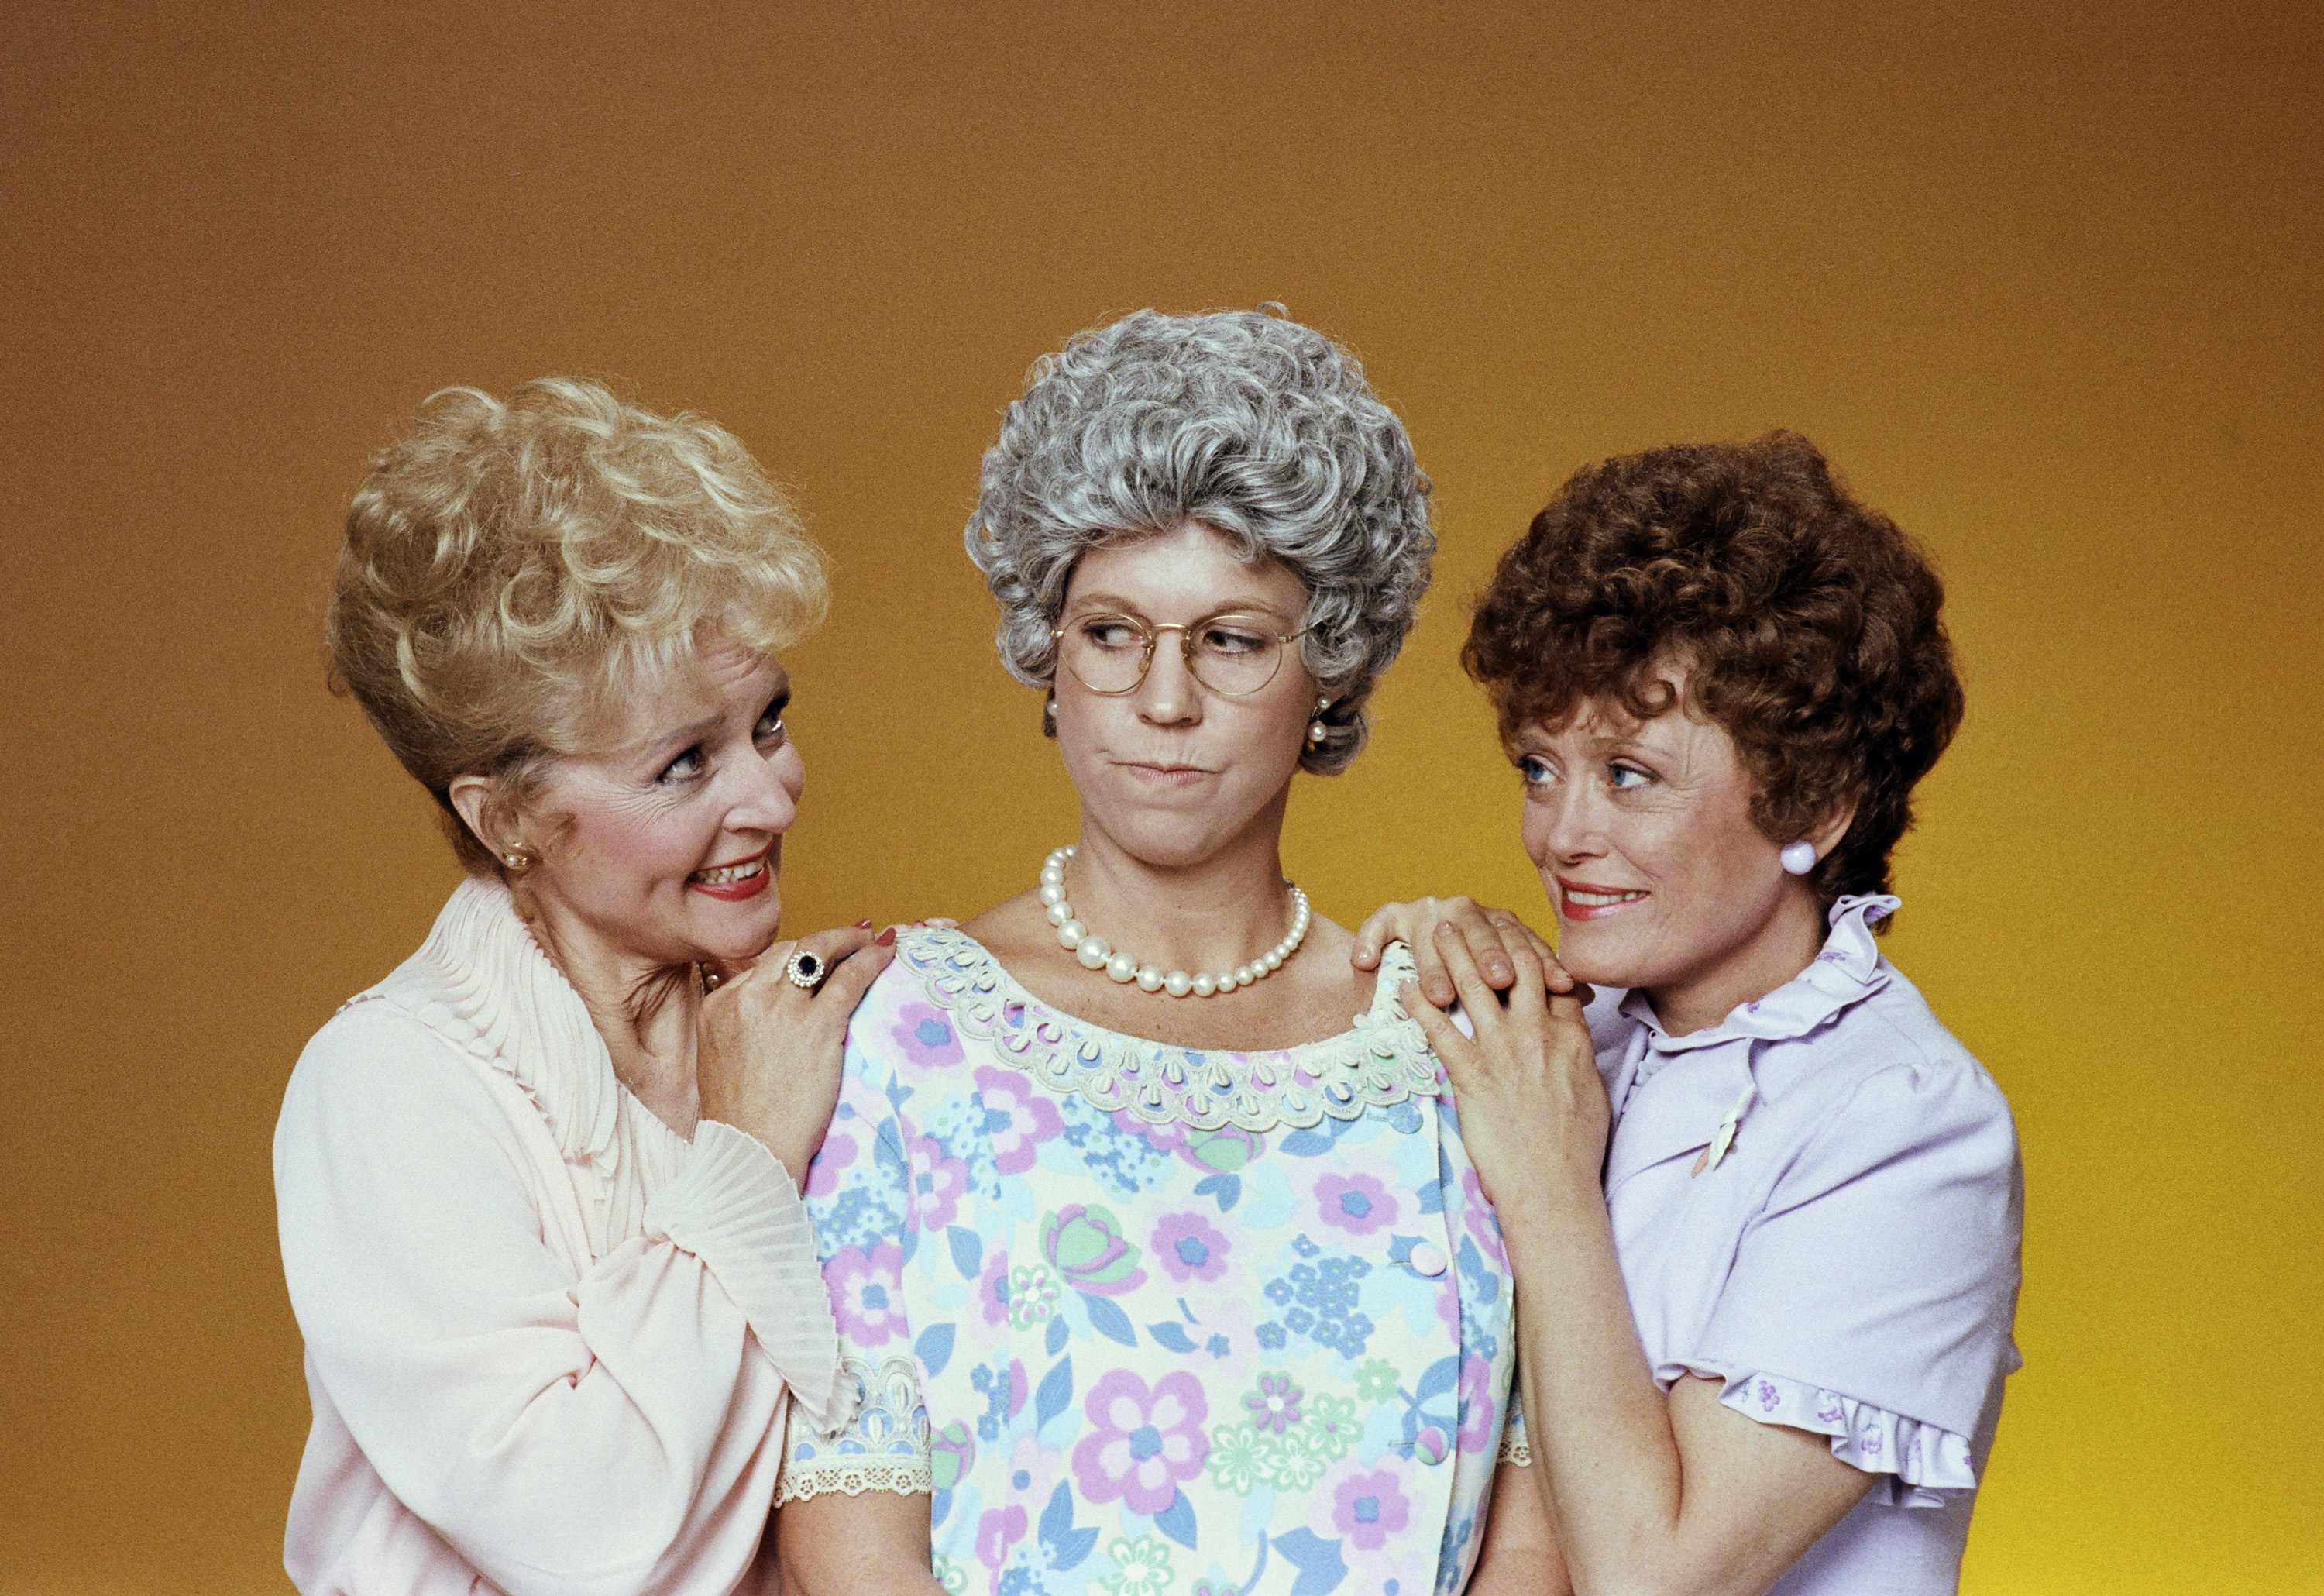 (L-R) Actress Betty White as Ellen Harper Jackson, Vicki Lawrence as Thelma 'Mama' Crowley Harper and Rue McClanahan as Aunt Fran Crowley in the sitcom "Mama's Family" on July 21, 1983 | Source: Getty Images